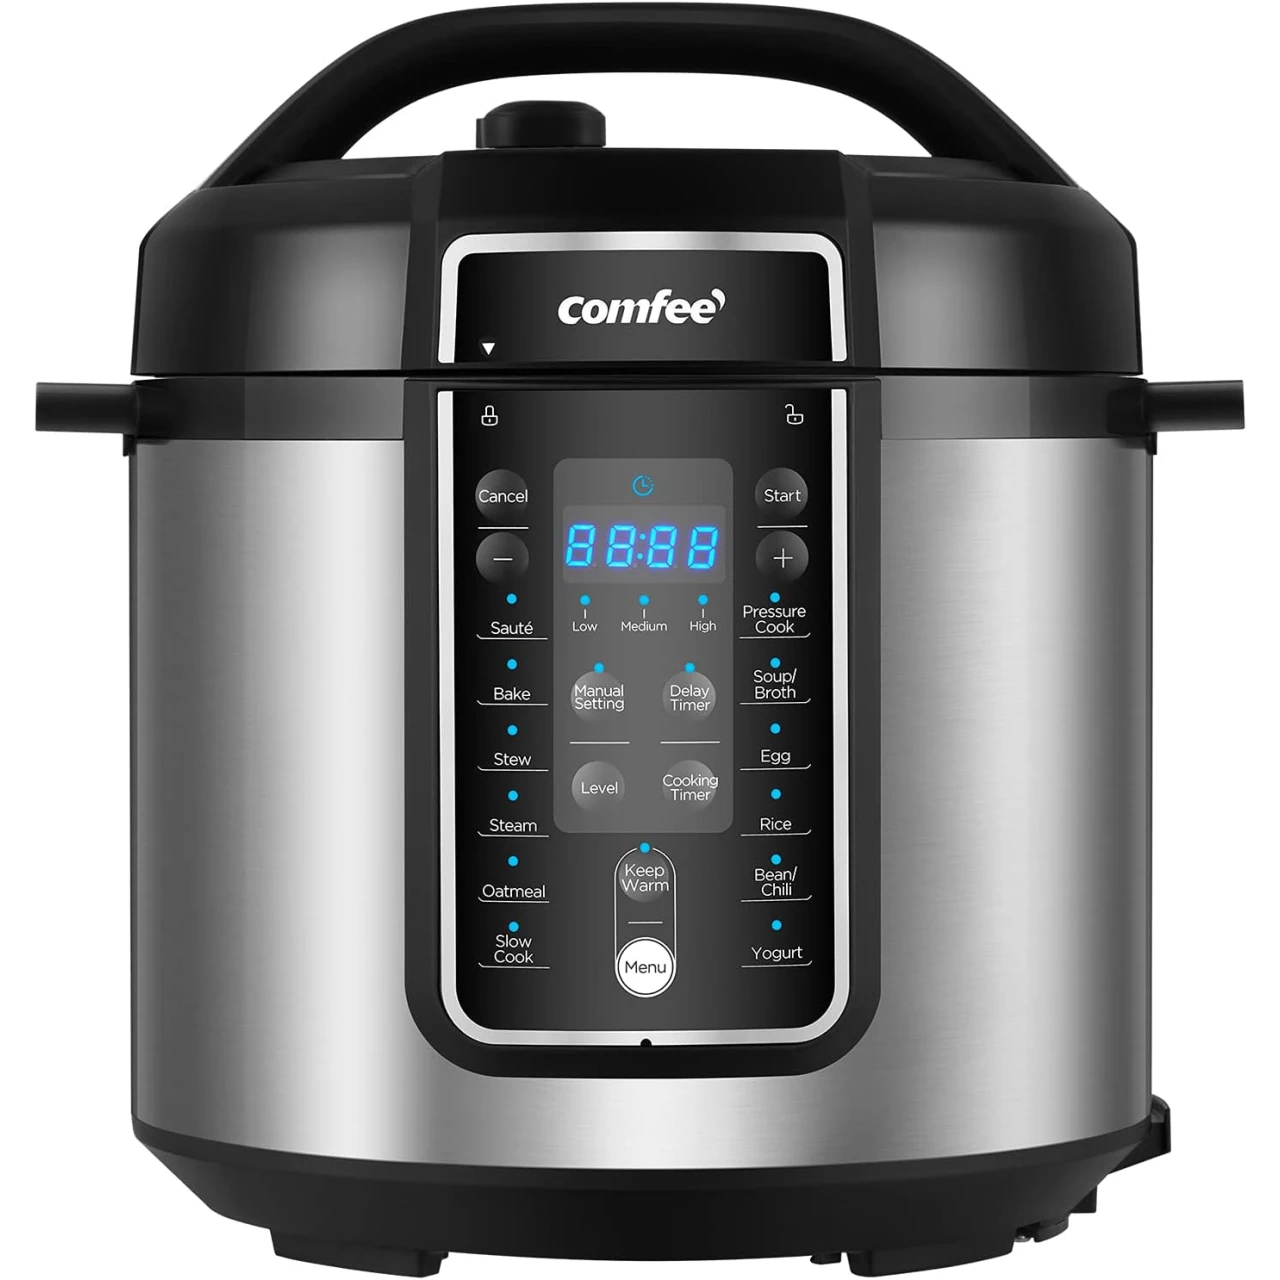 COMFEE&rsquo; Pressure Cooker 6 Quart with 12 Presets, Multi-Functional Programmable Slow Cooker, Rice Cooker, Steamer, Sauté pan, Egg Cooker, Warmer and More